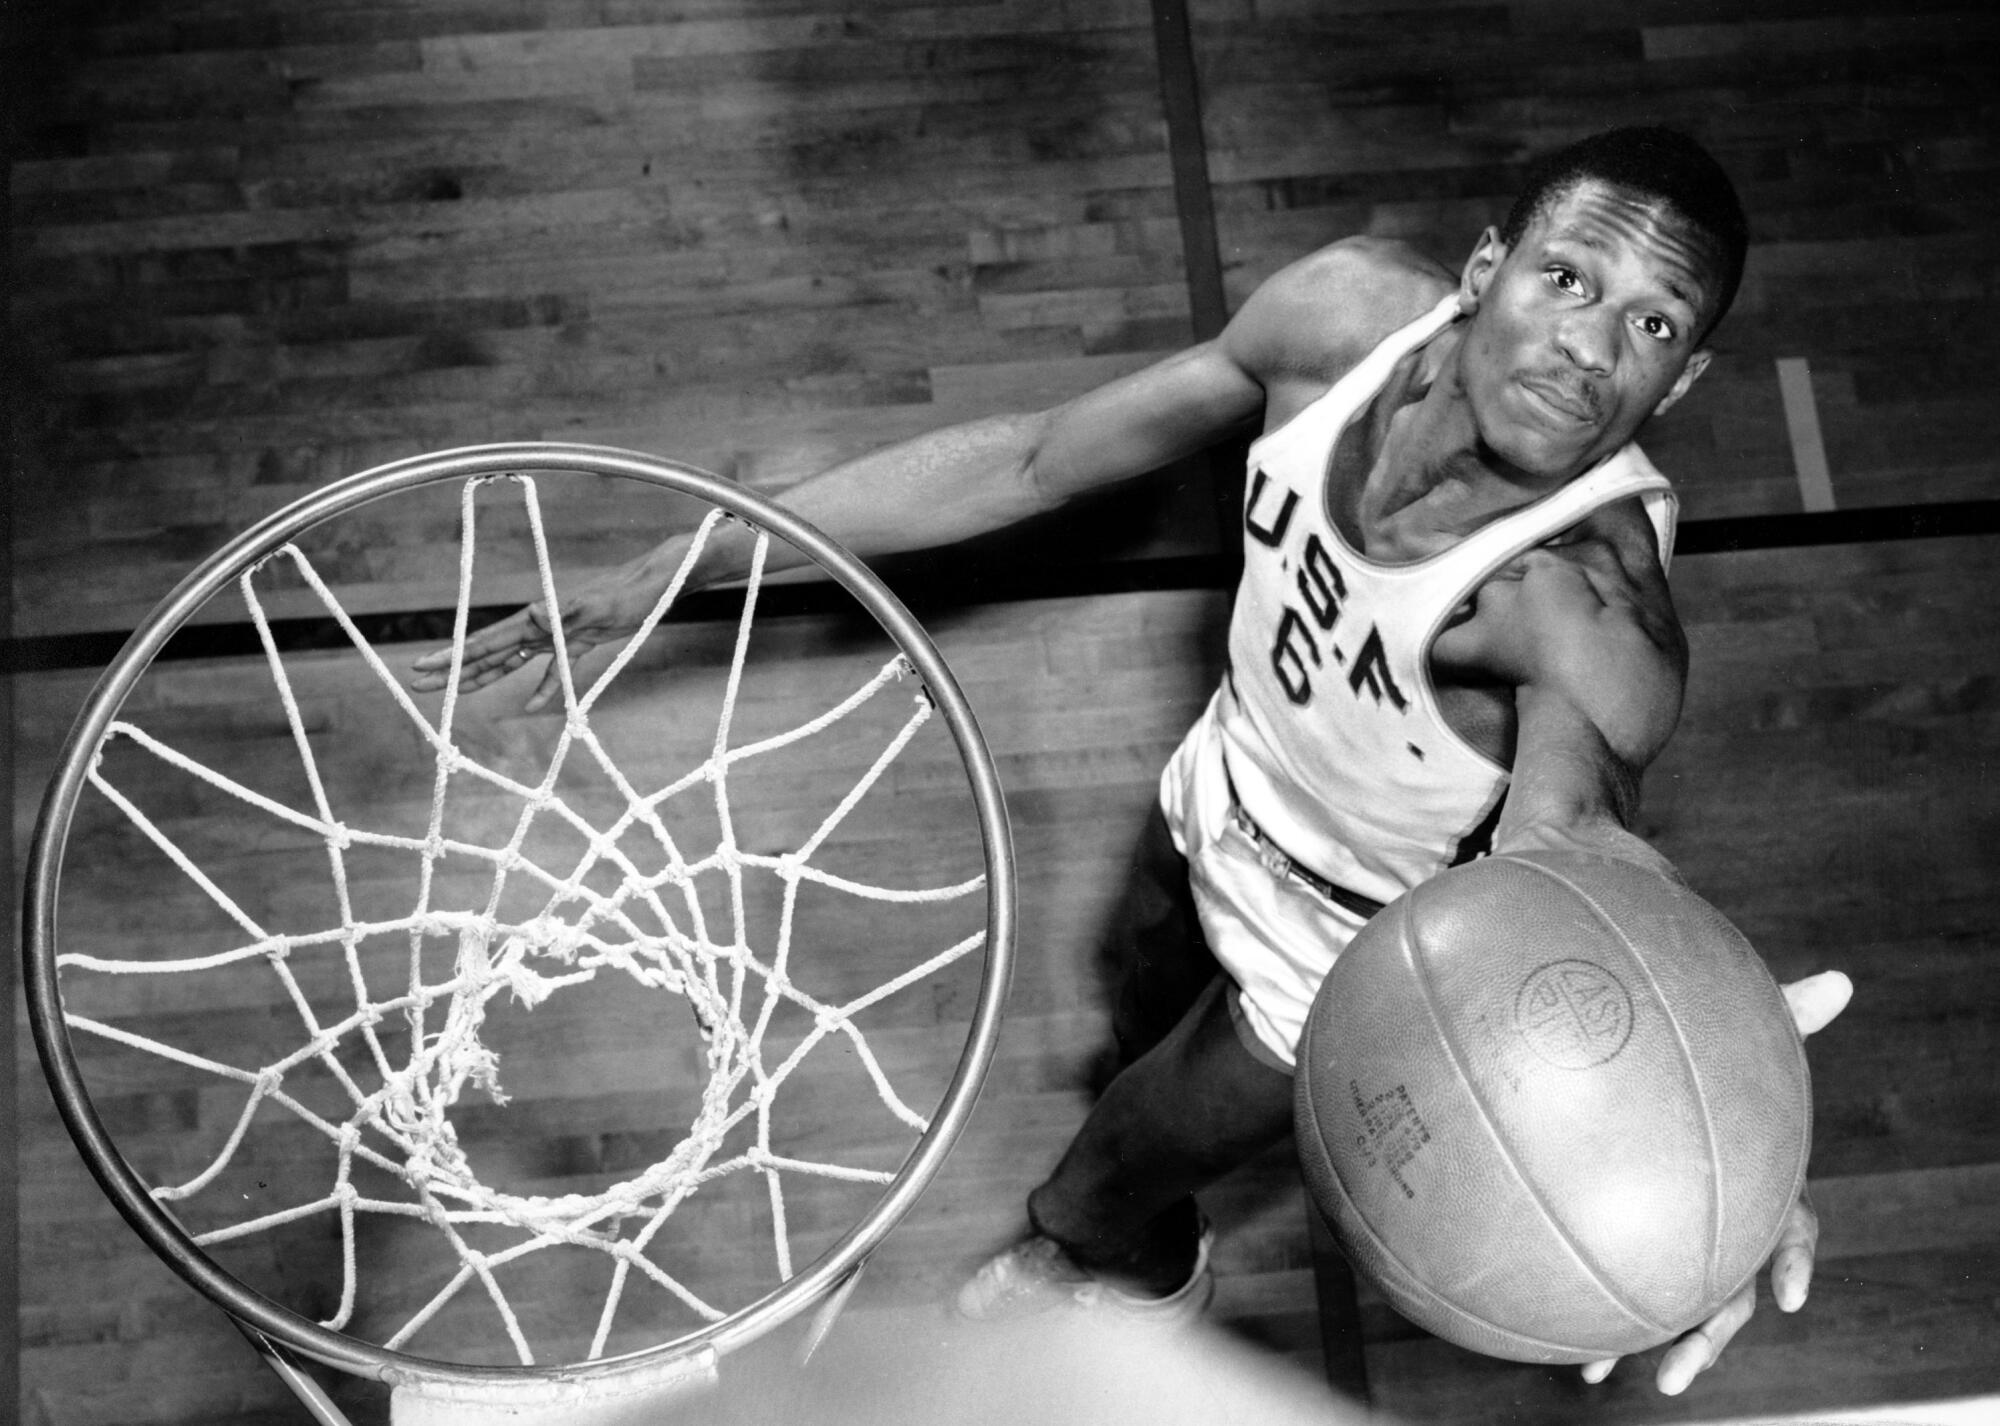 A view from above as Bill Russell shoots a layup.